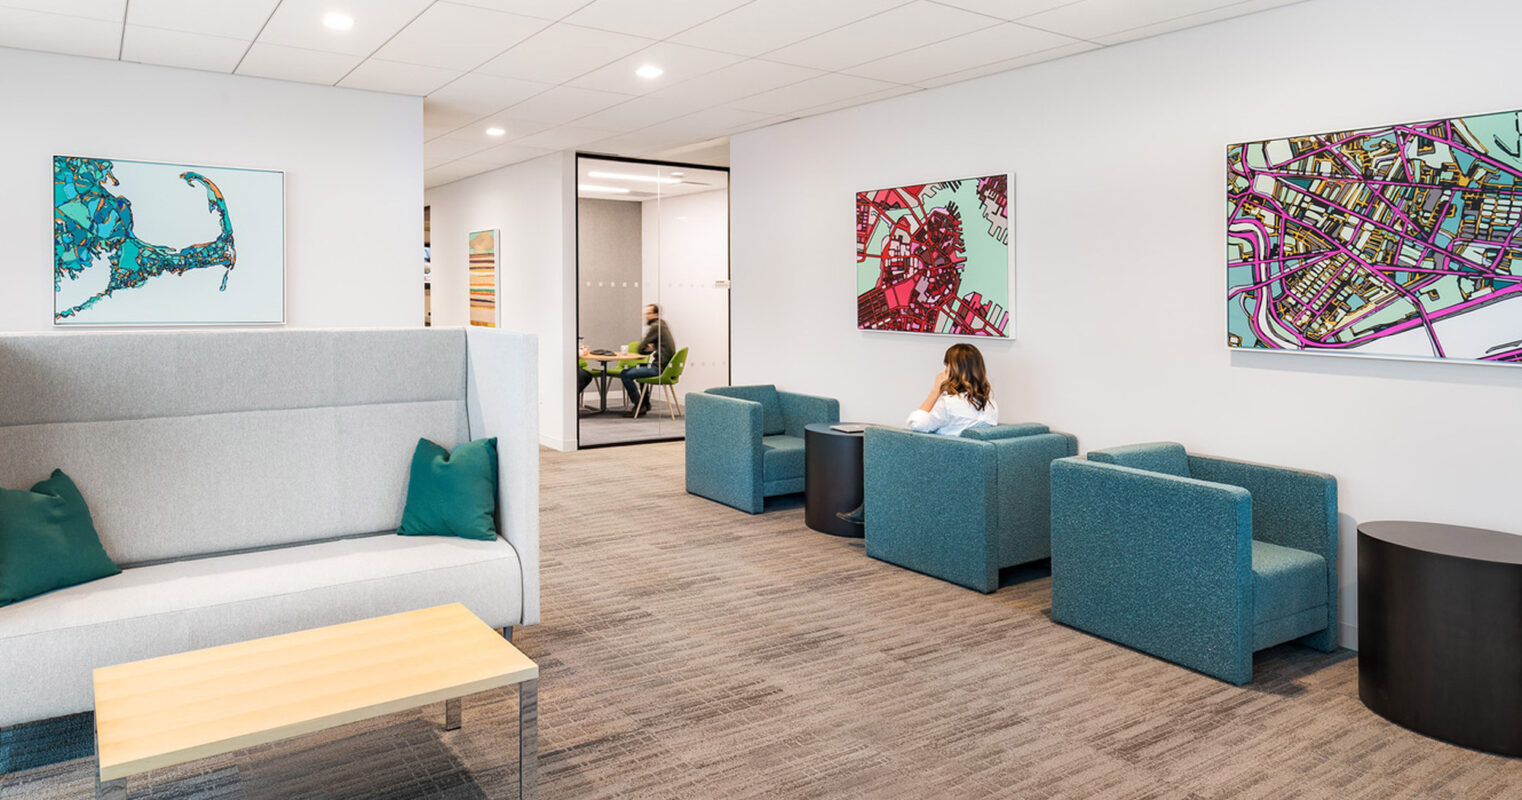 Modern office lounge with clean lines and a neutral color palette complemented by bold artwork. Features include blue upholstered seating, a light wood coffee table, and minimalist decor.